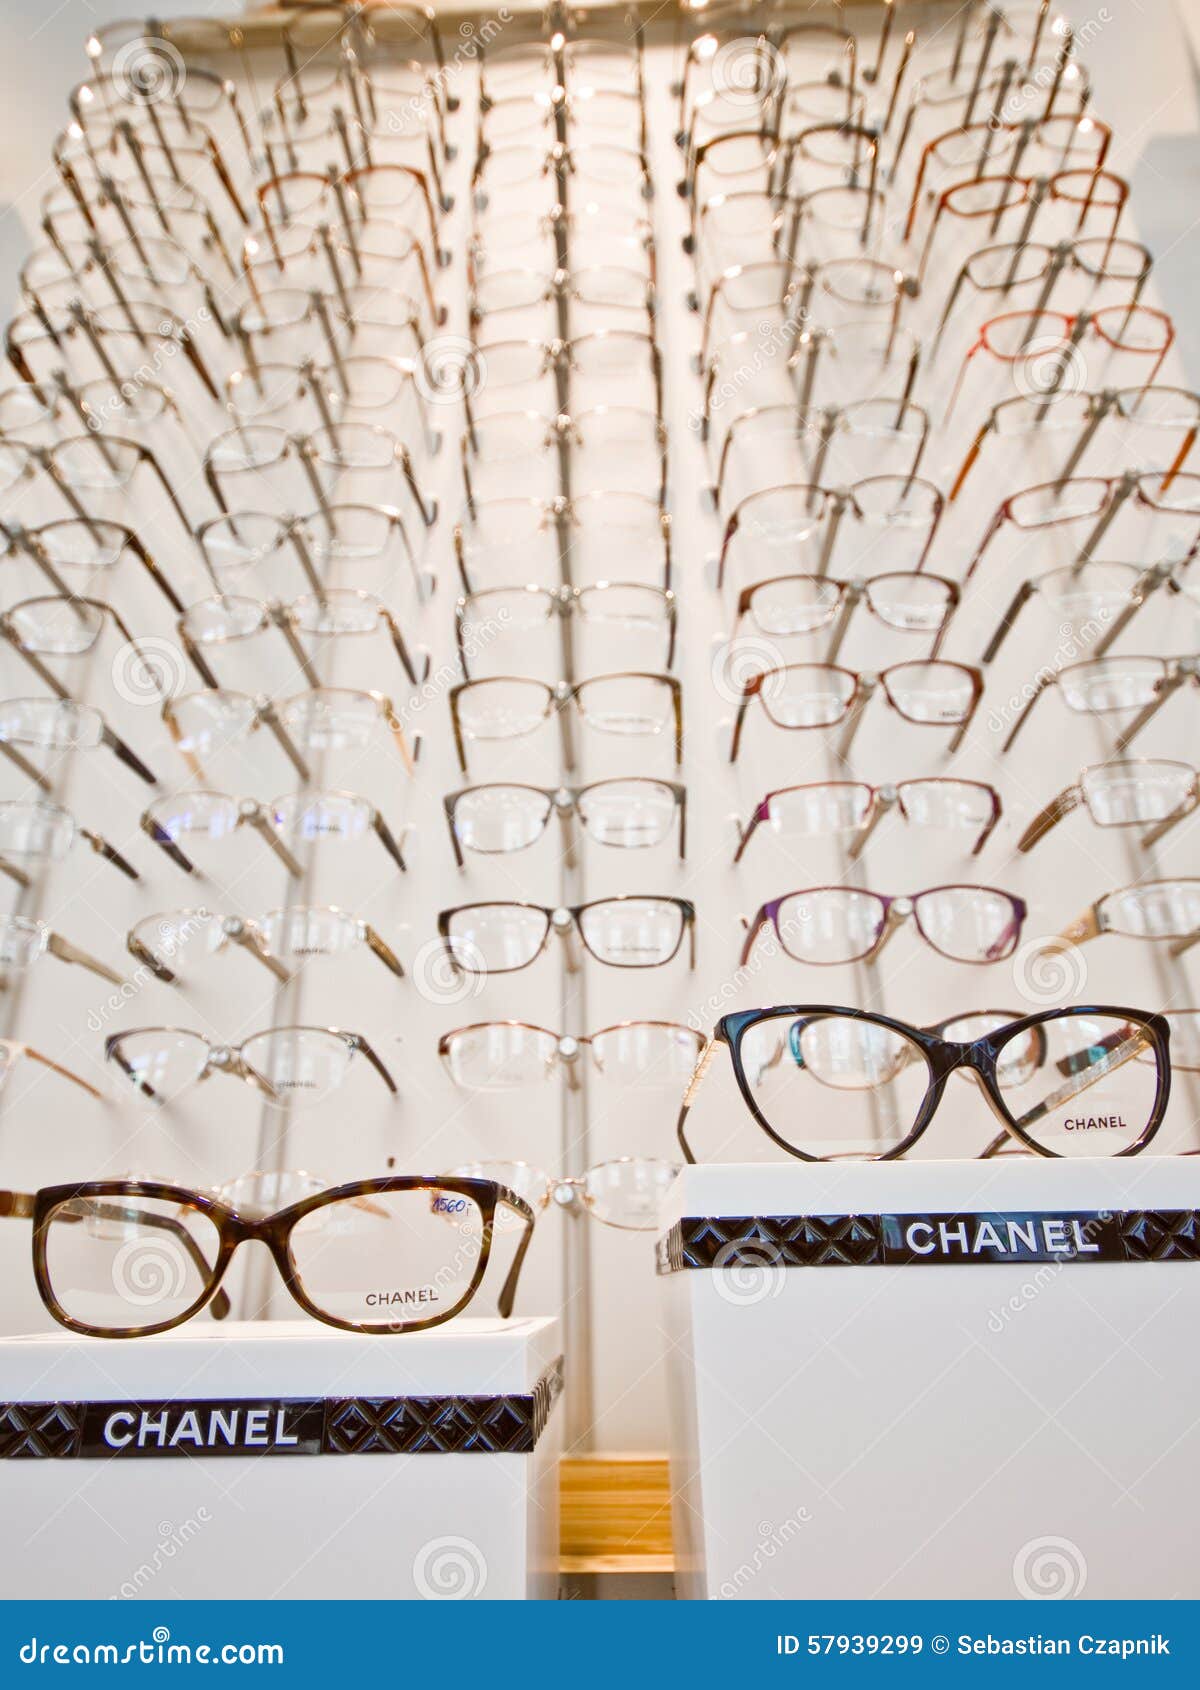 Chanel Eyeglasses Frames on Display Editorial Stock Image - Image of  luxurious, glasses: 57939299